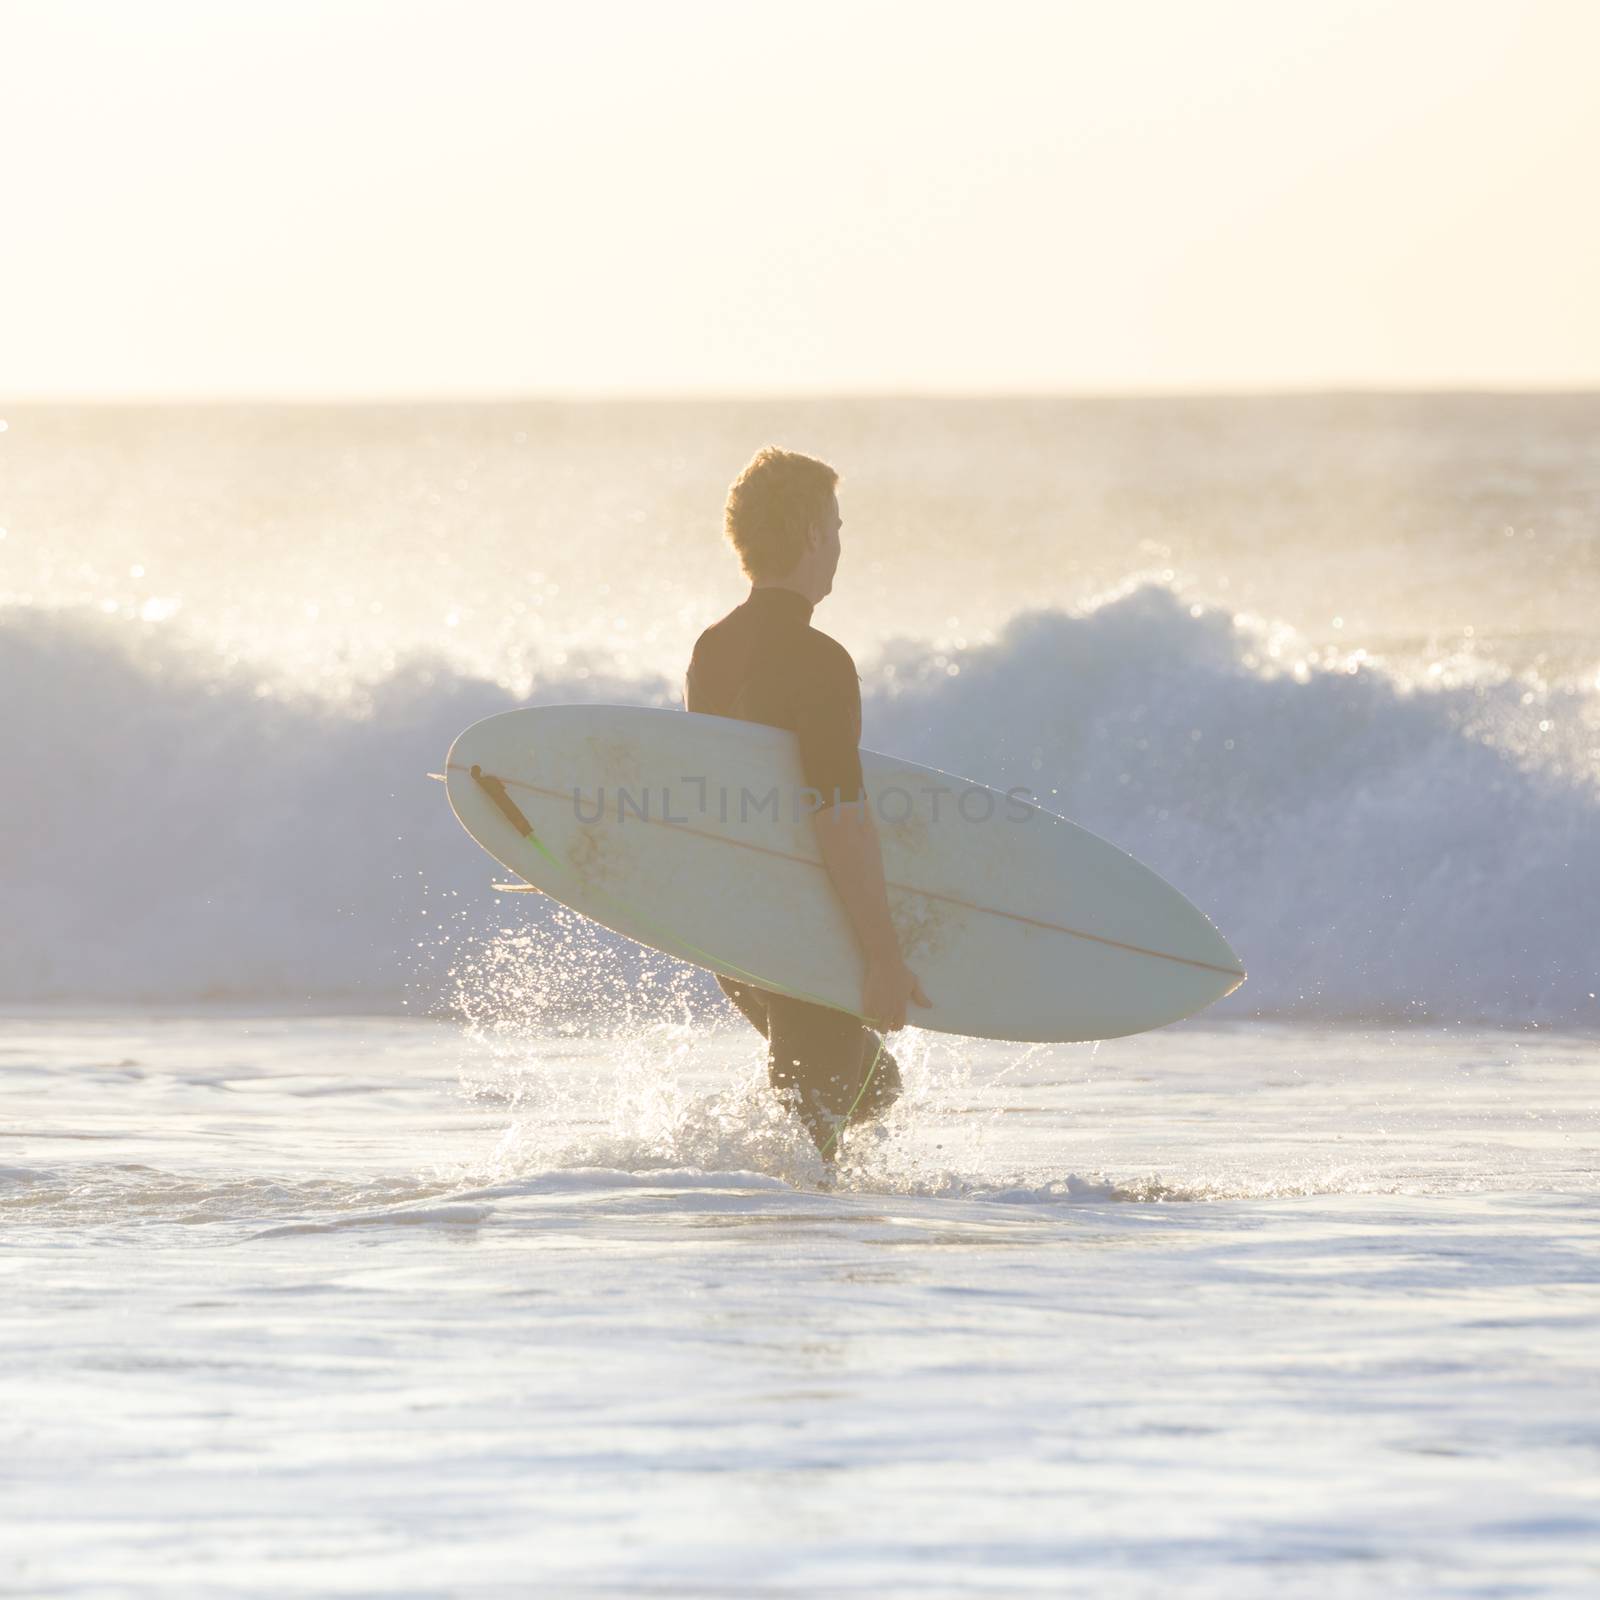 Male surfers on sandy beach with the surfboard in sunset.  